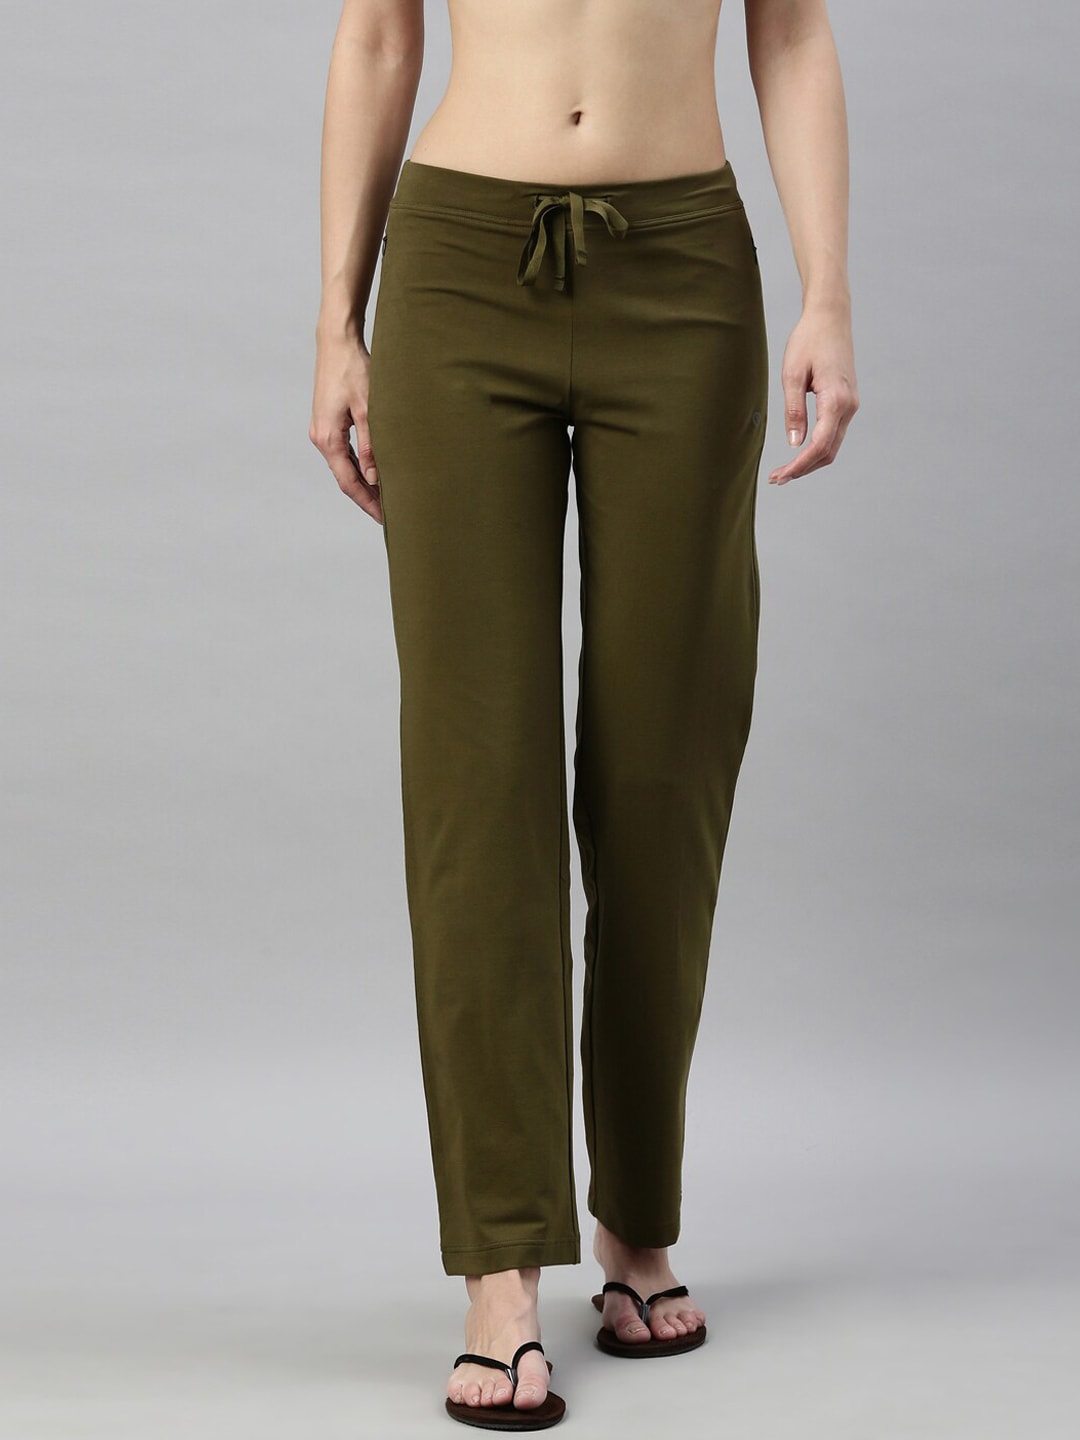 Enamor Women Olive Green Cotton Slim-Fit Lounge Pants Price in India